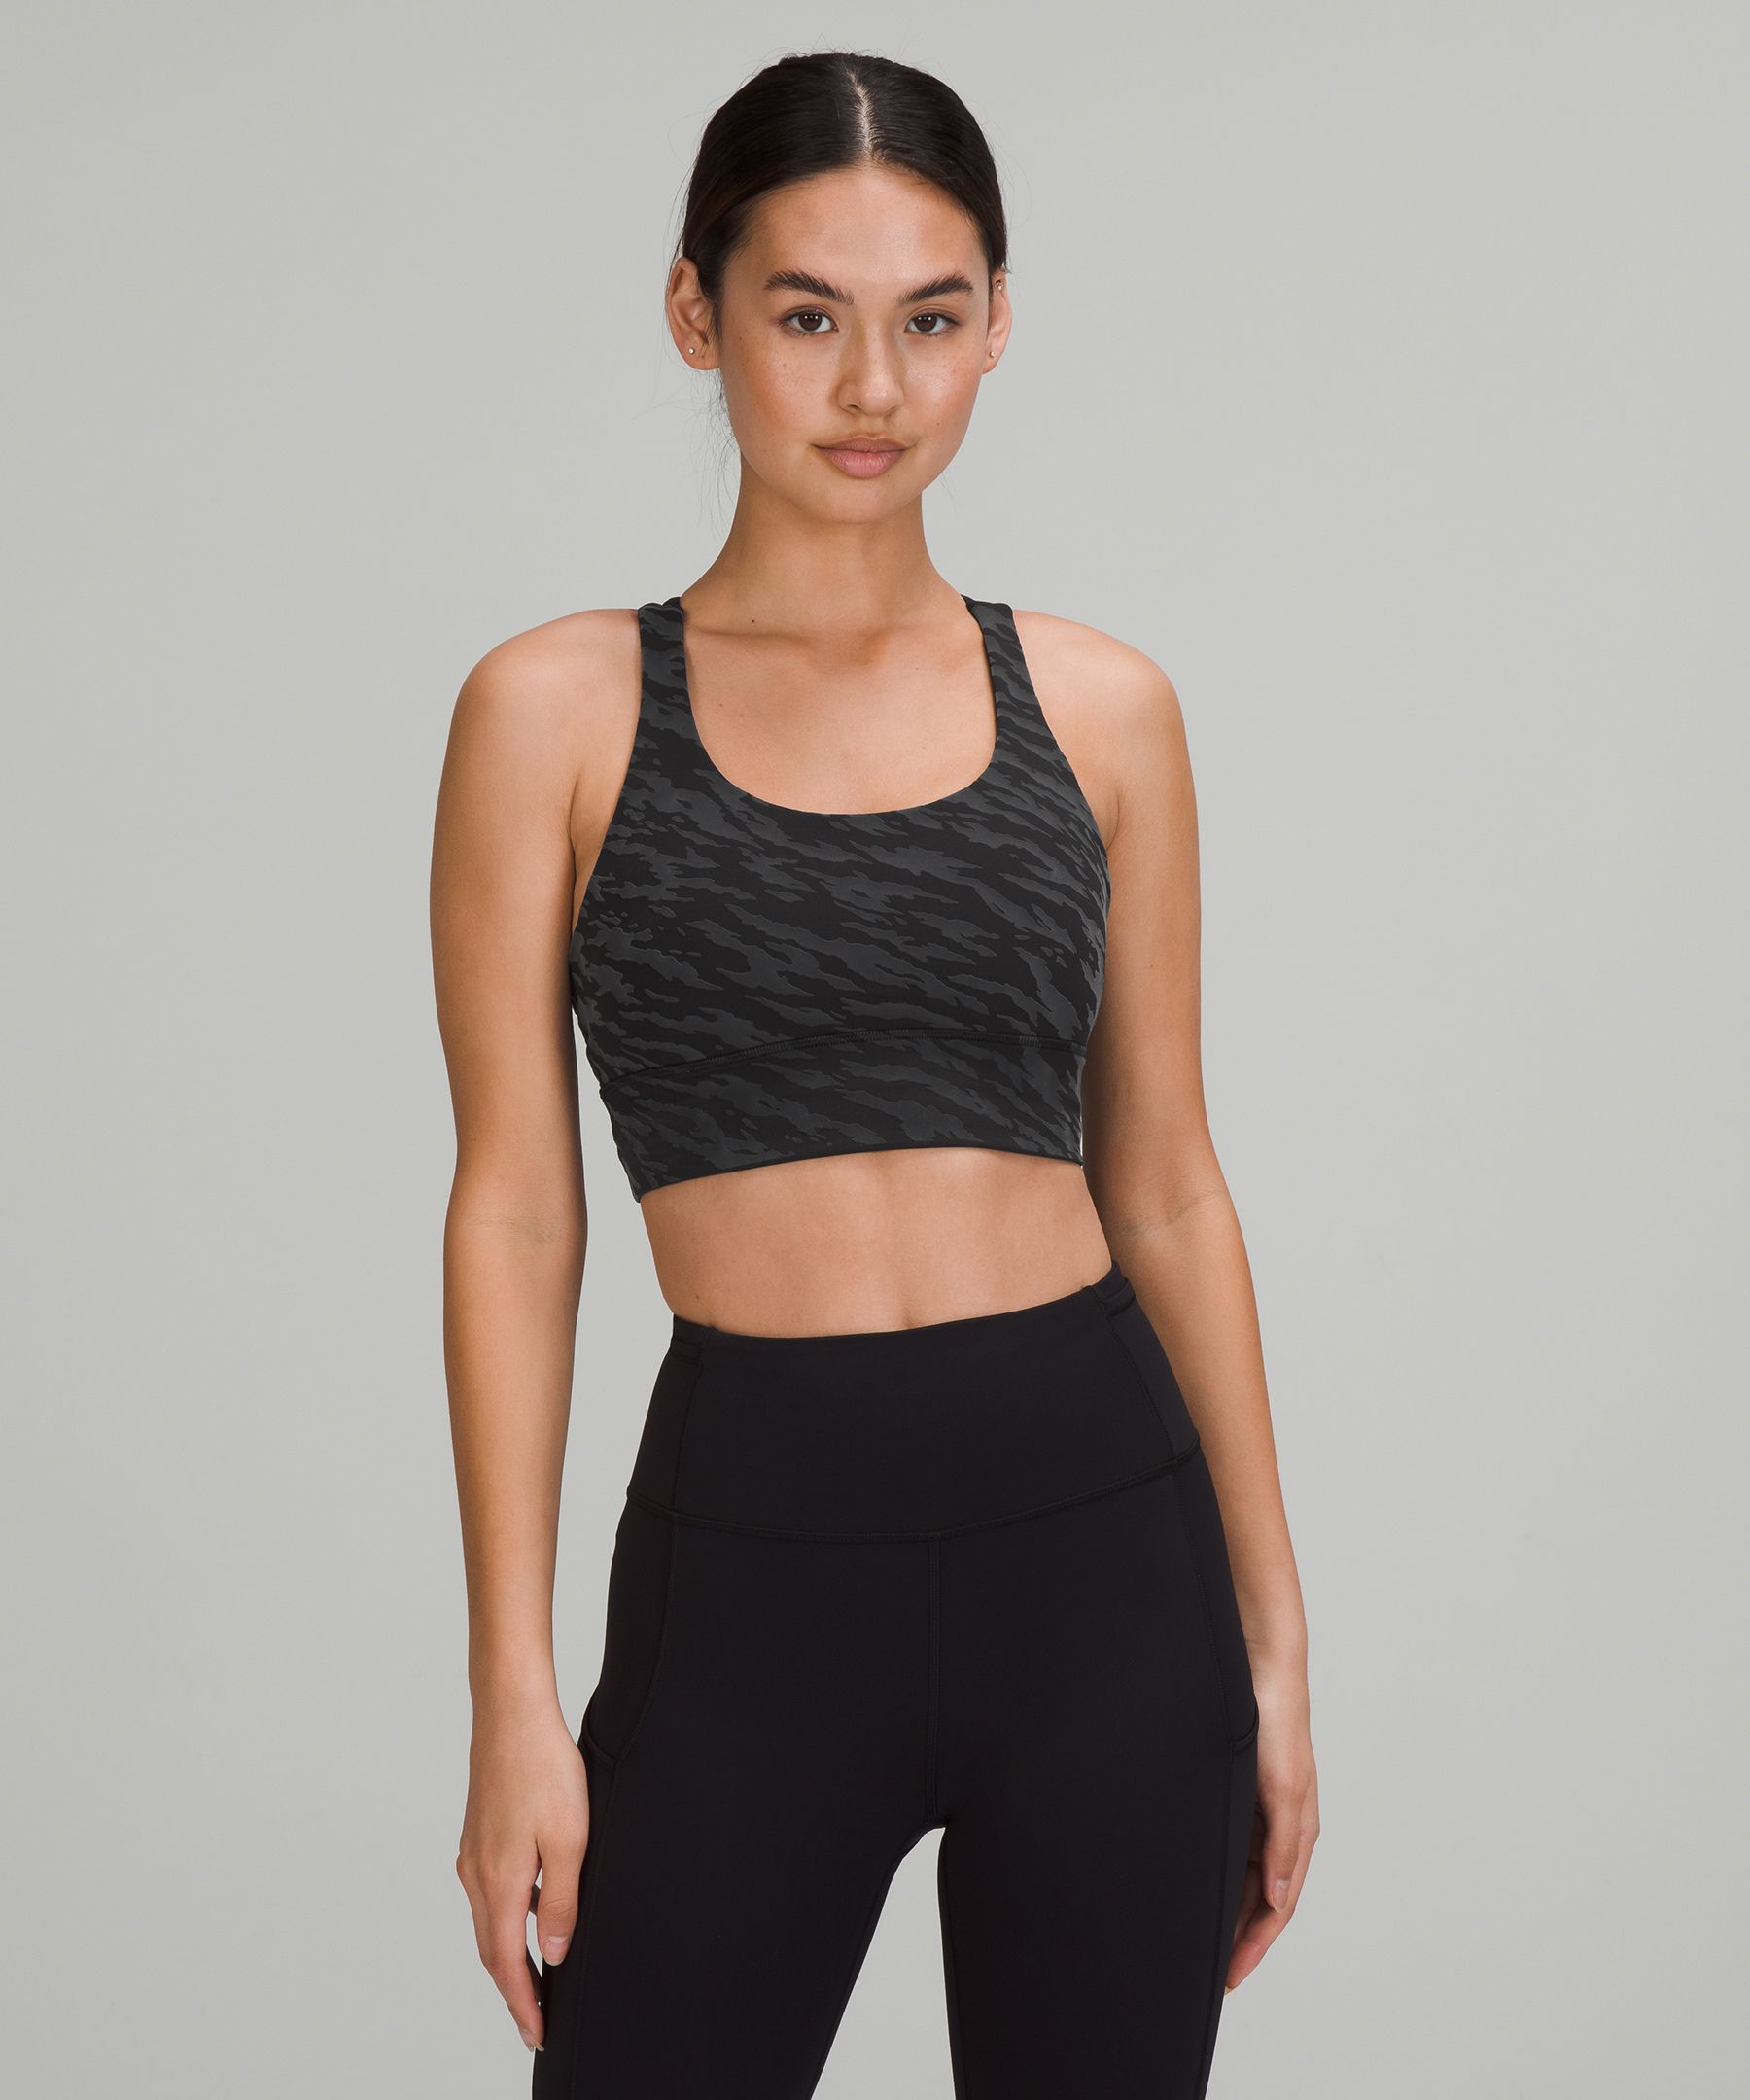 Look of the Week: New Activewear for a New Year